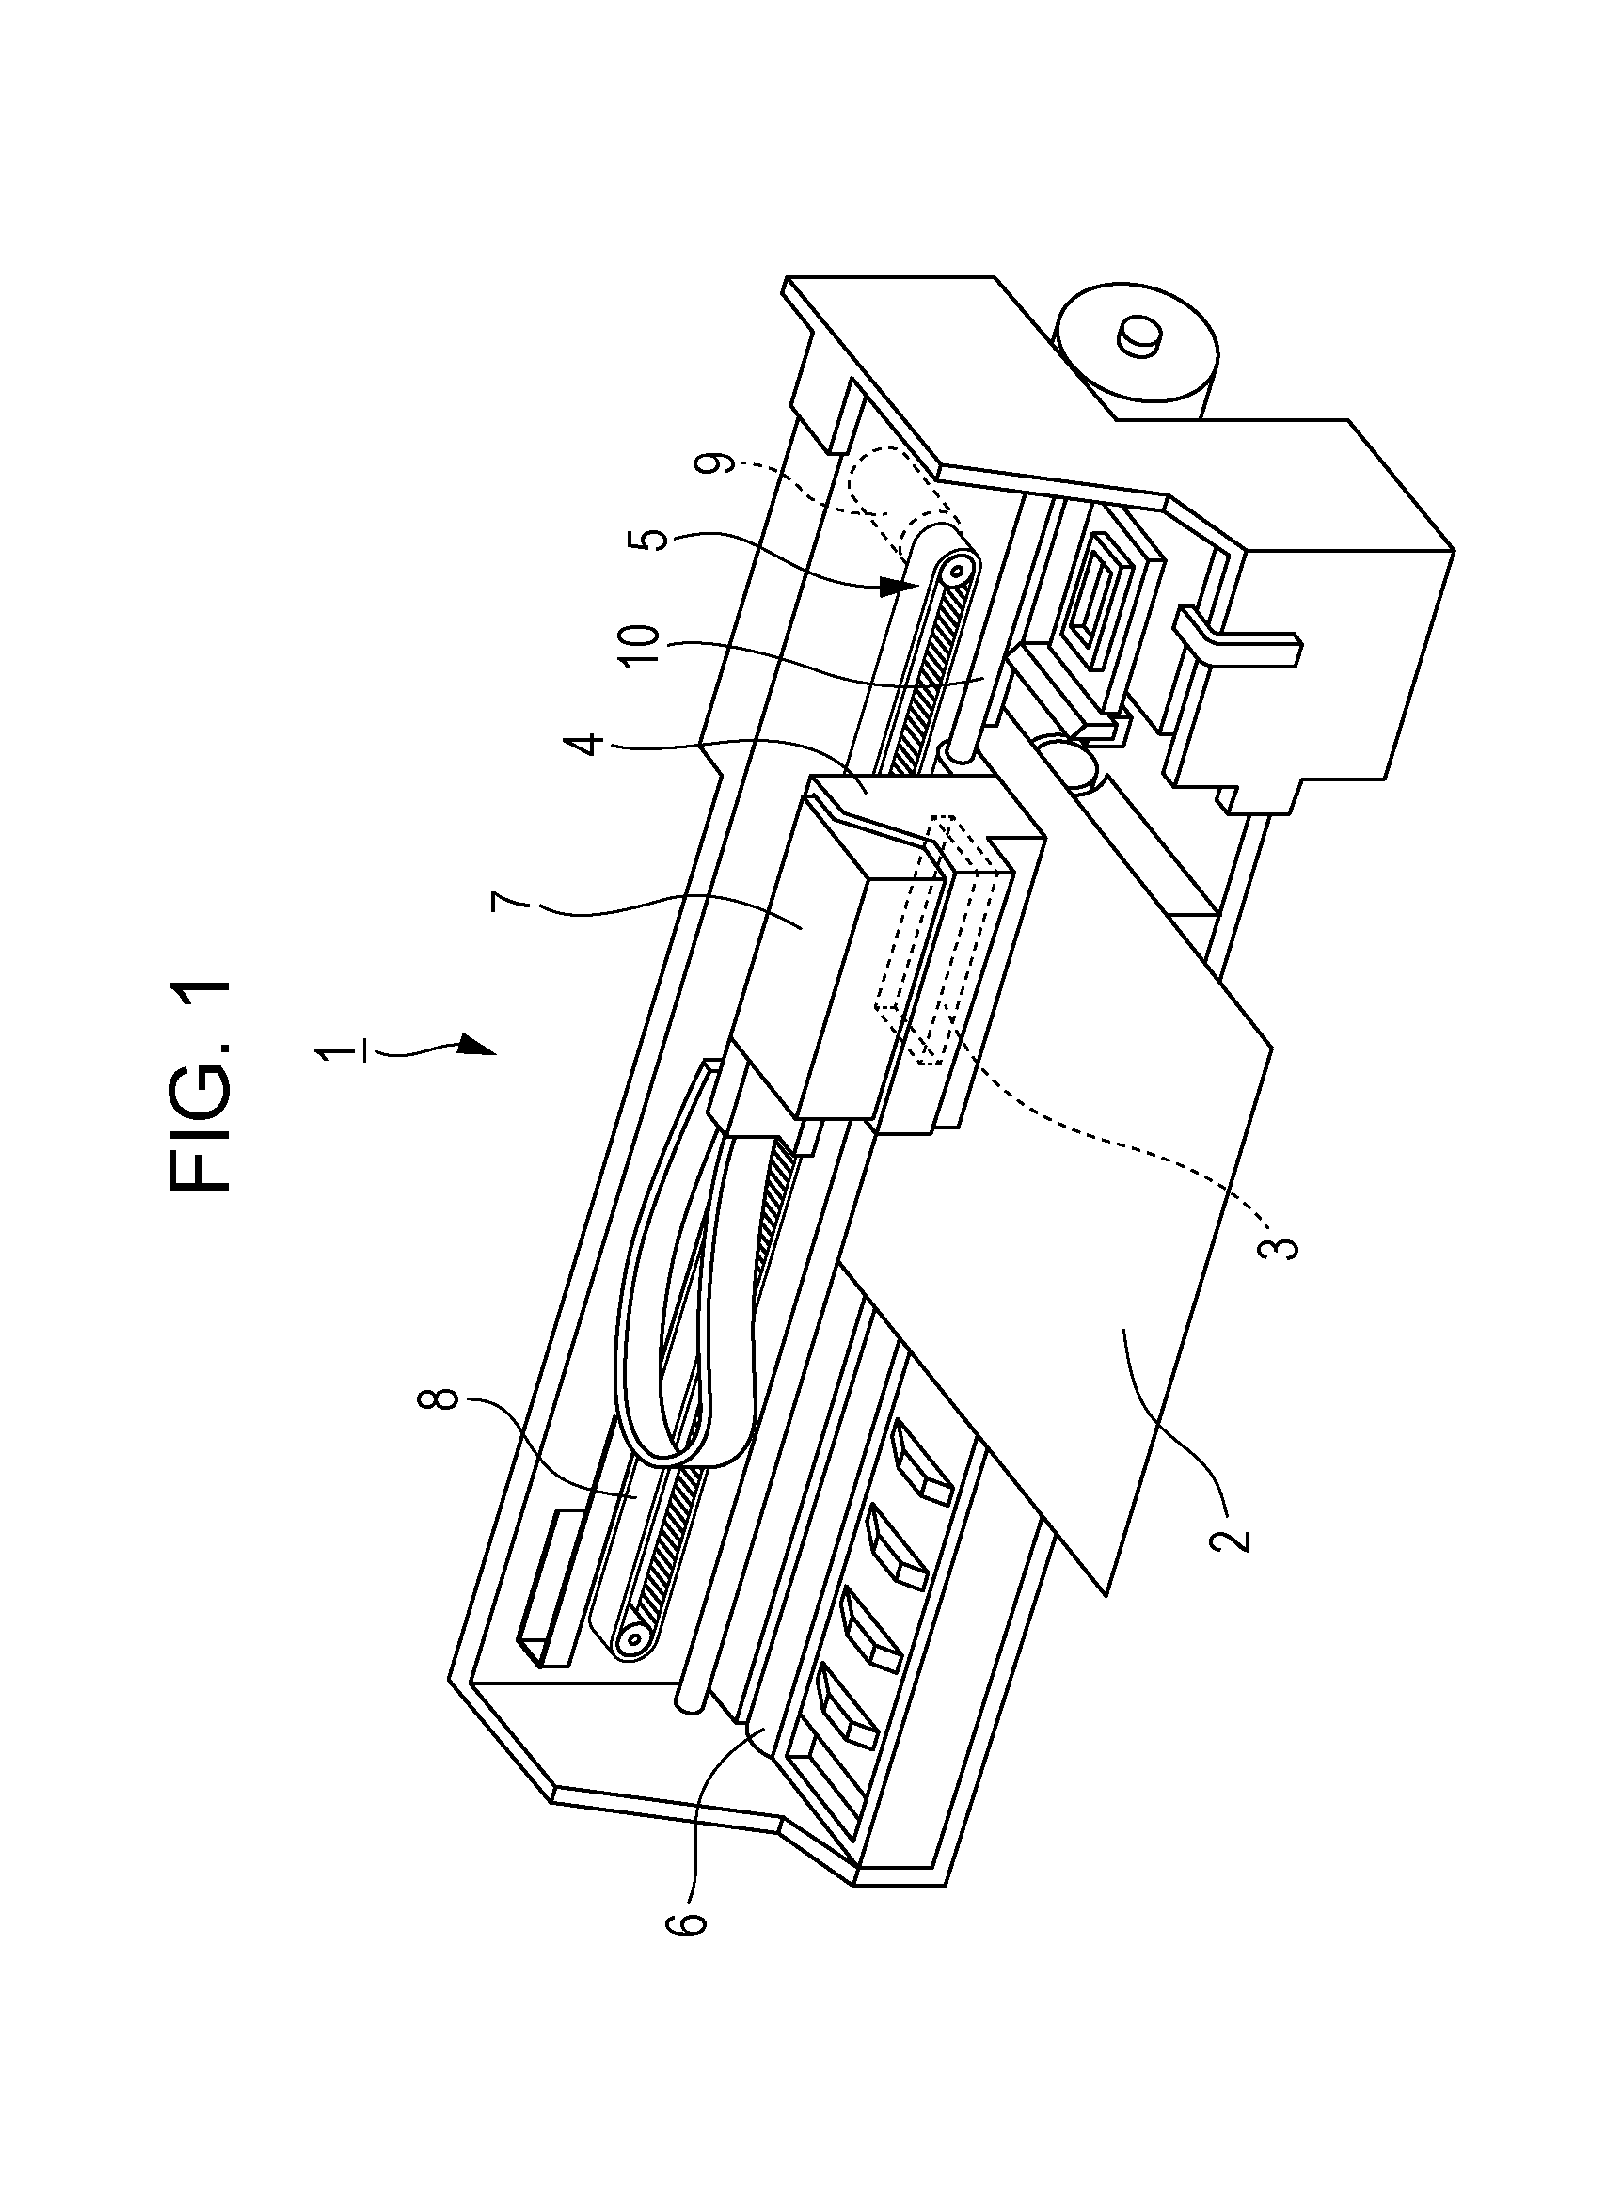 Piezoelectric device, liquid ejection head, and method of manufacturing piezoelectric device